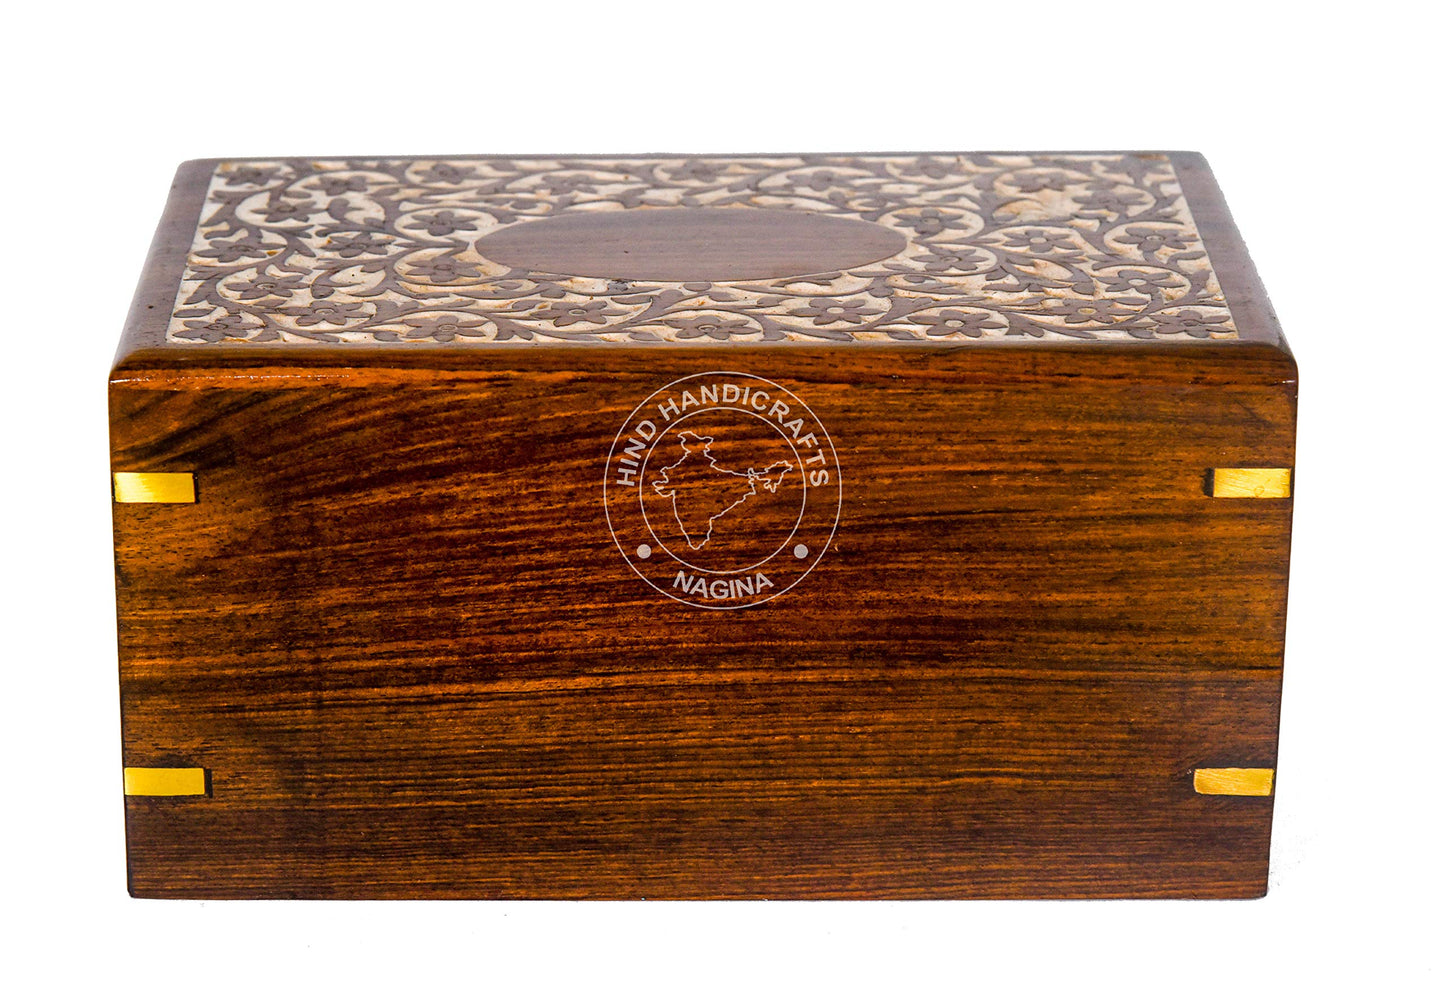 HIND HANDICRAFTS Beautifully Handmade & Handcrafted Rosewood Floral Engraving Wooden Cremation Box/Urns for Human Ashes Adult, Funeral Urn Box (9" x